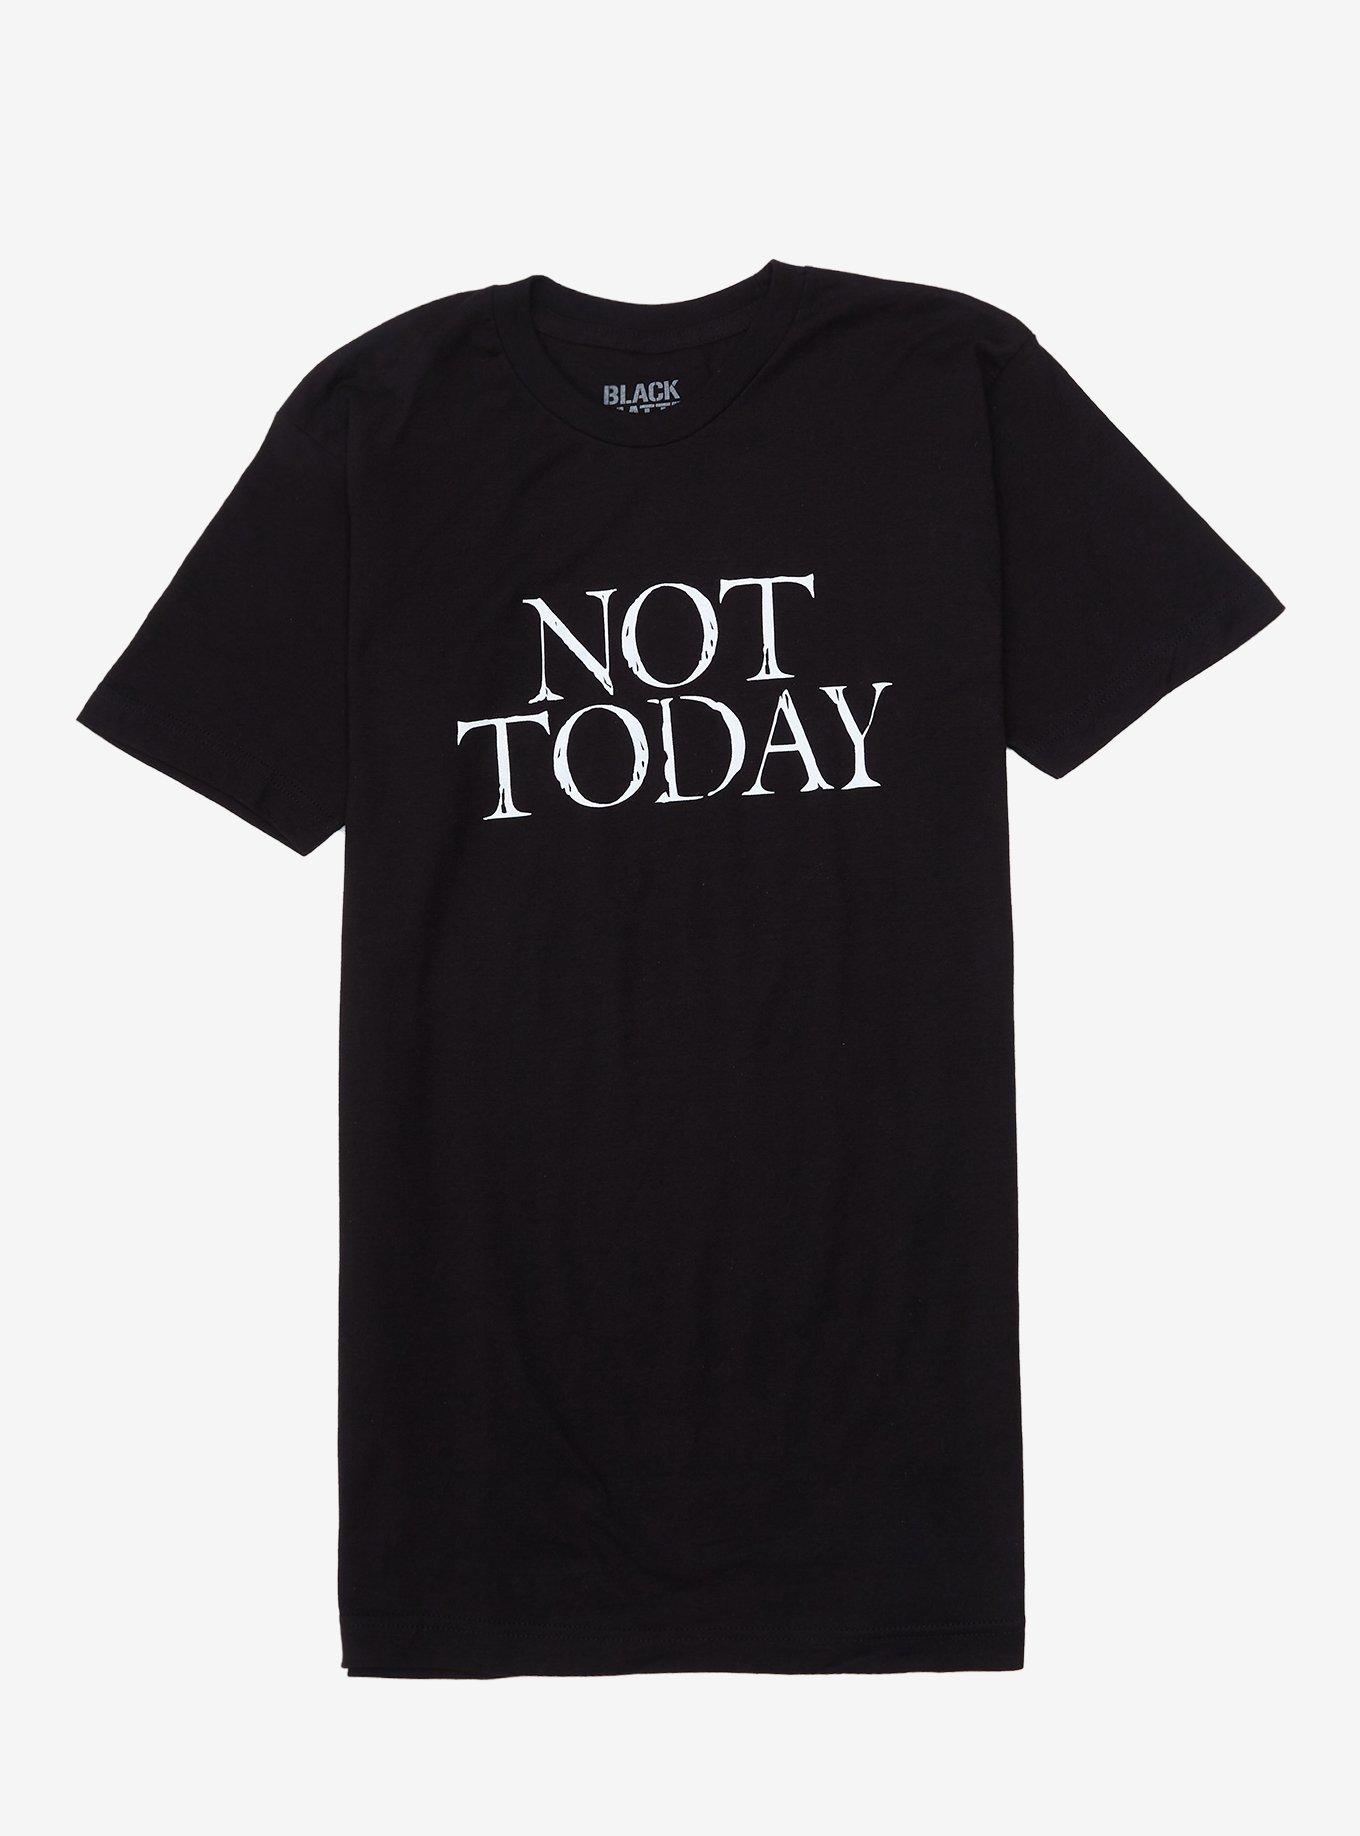 Not Today Black T-Shirt | Hot Topic